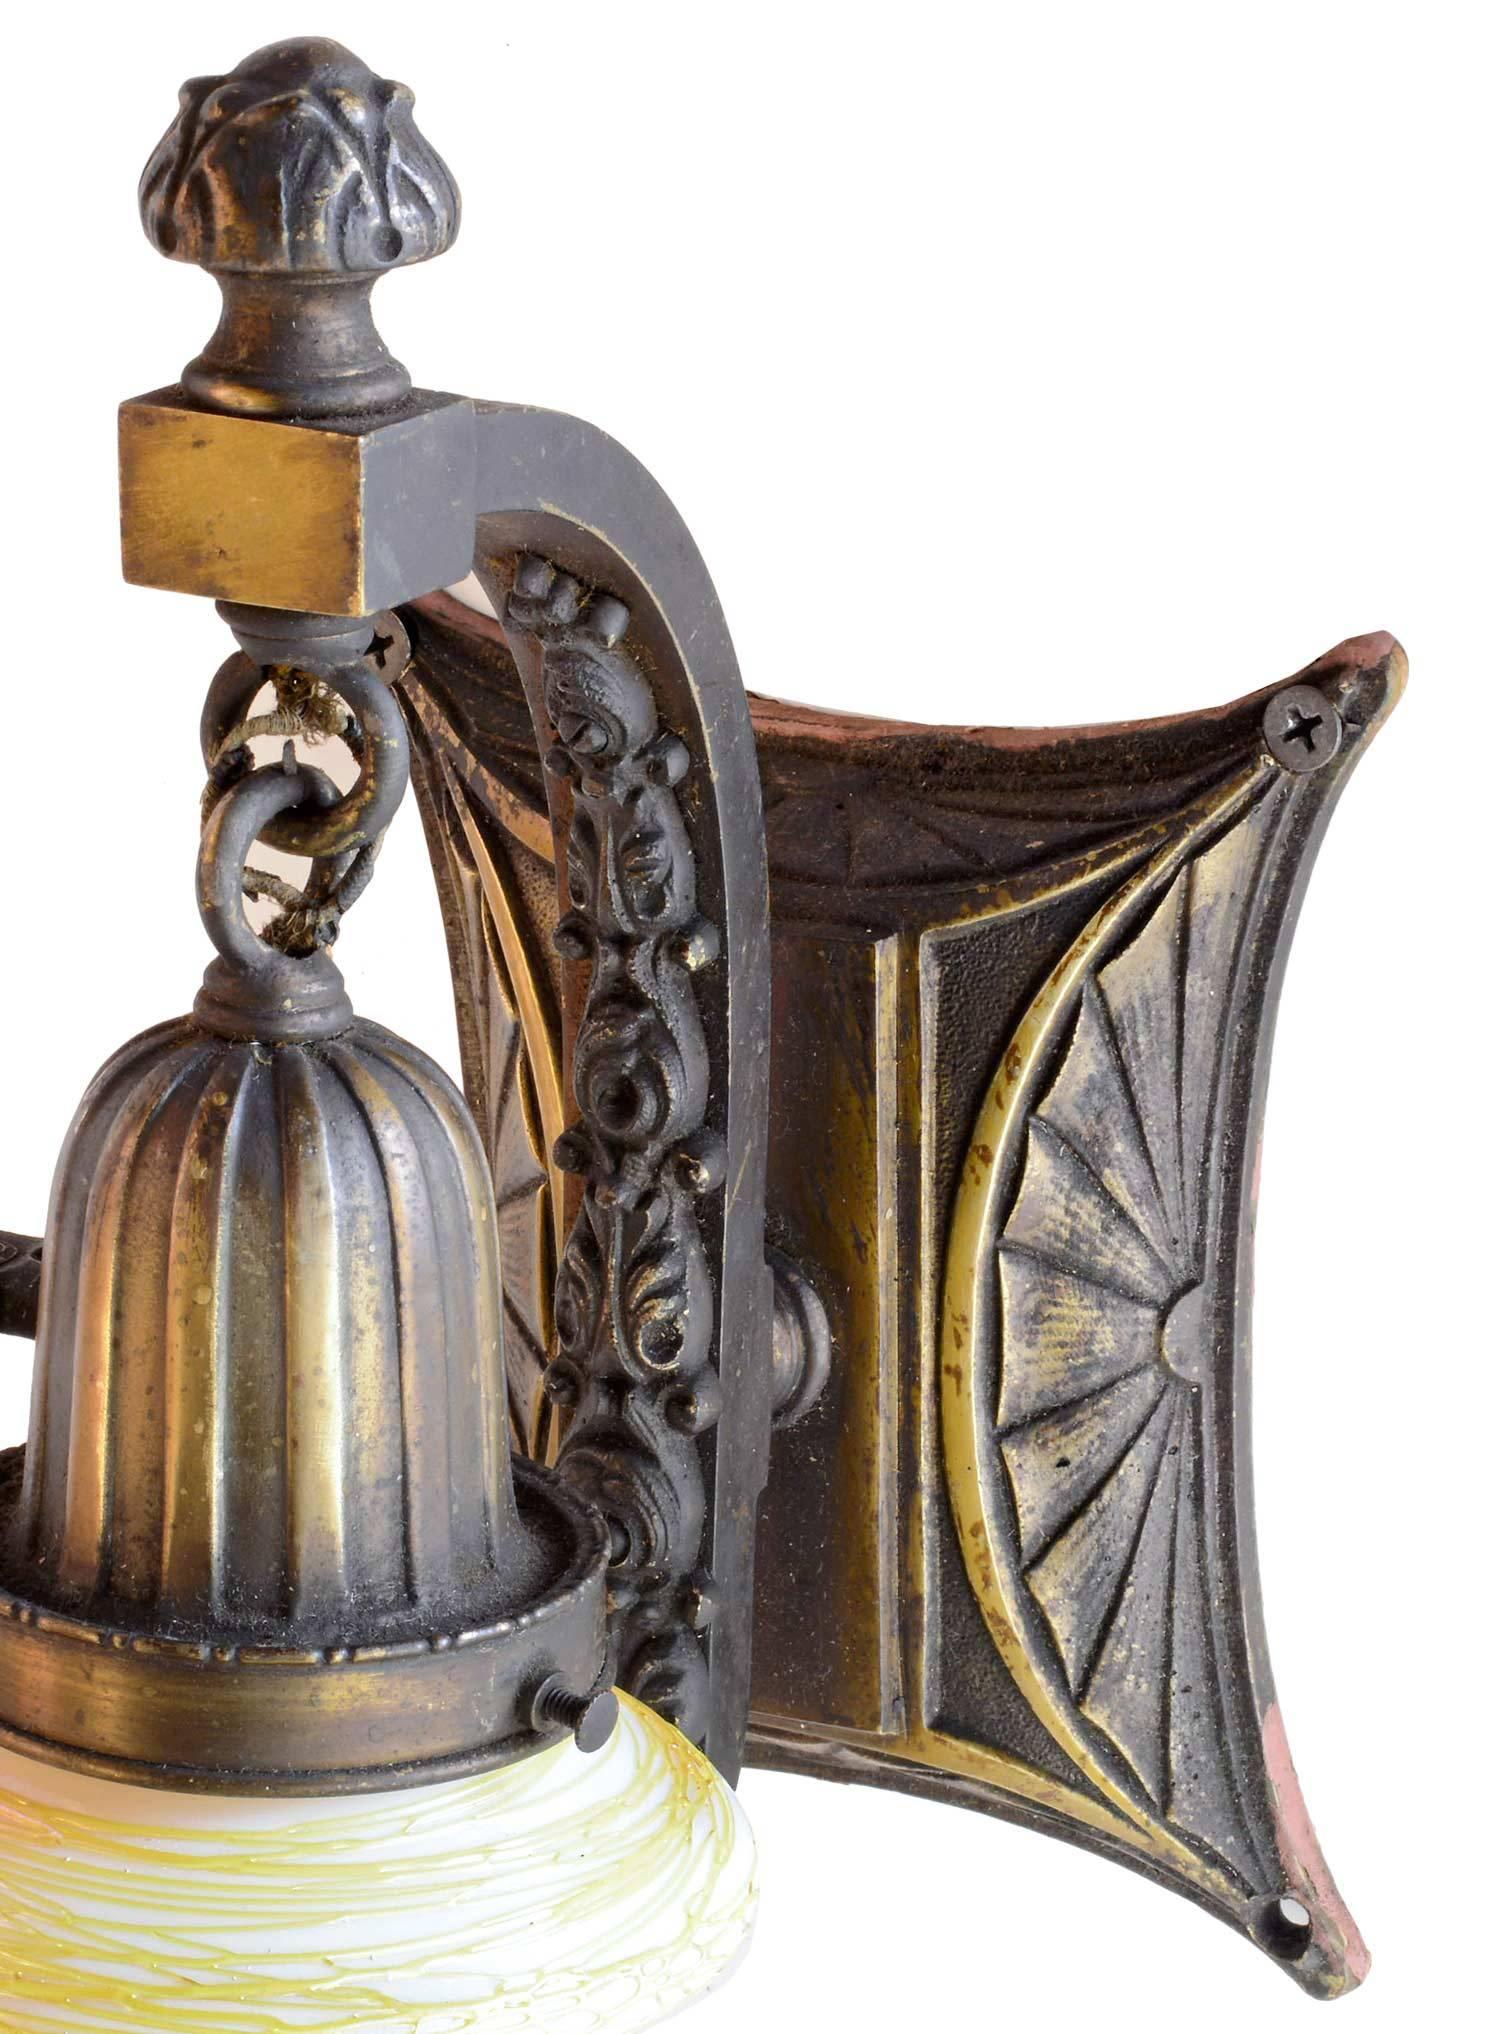 Finely cast sconce with floral details, fluted cup, and sunburst pattern. Includes original signed Quezal shade.

We find that early antique lighting was designed as objects of art and we treat each fixture with careful attention to preserve